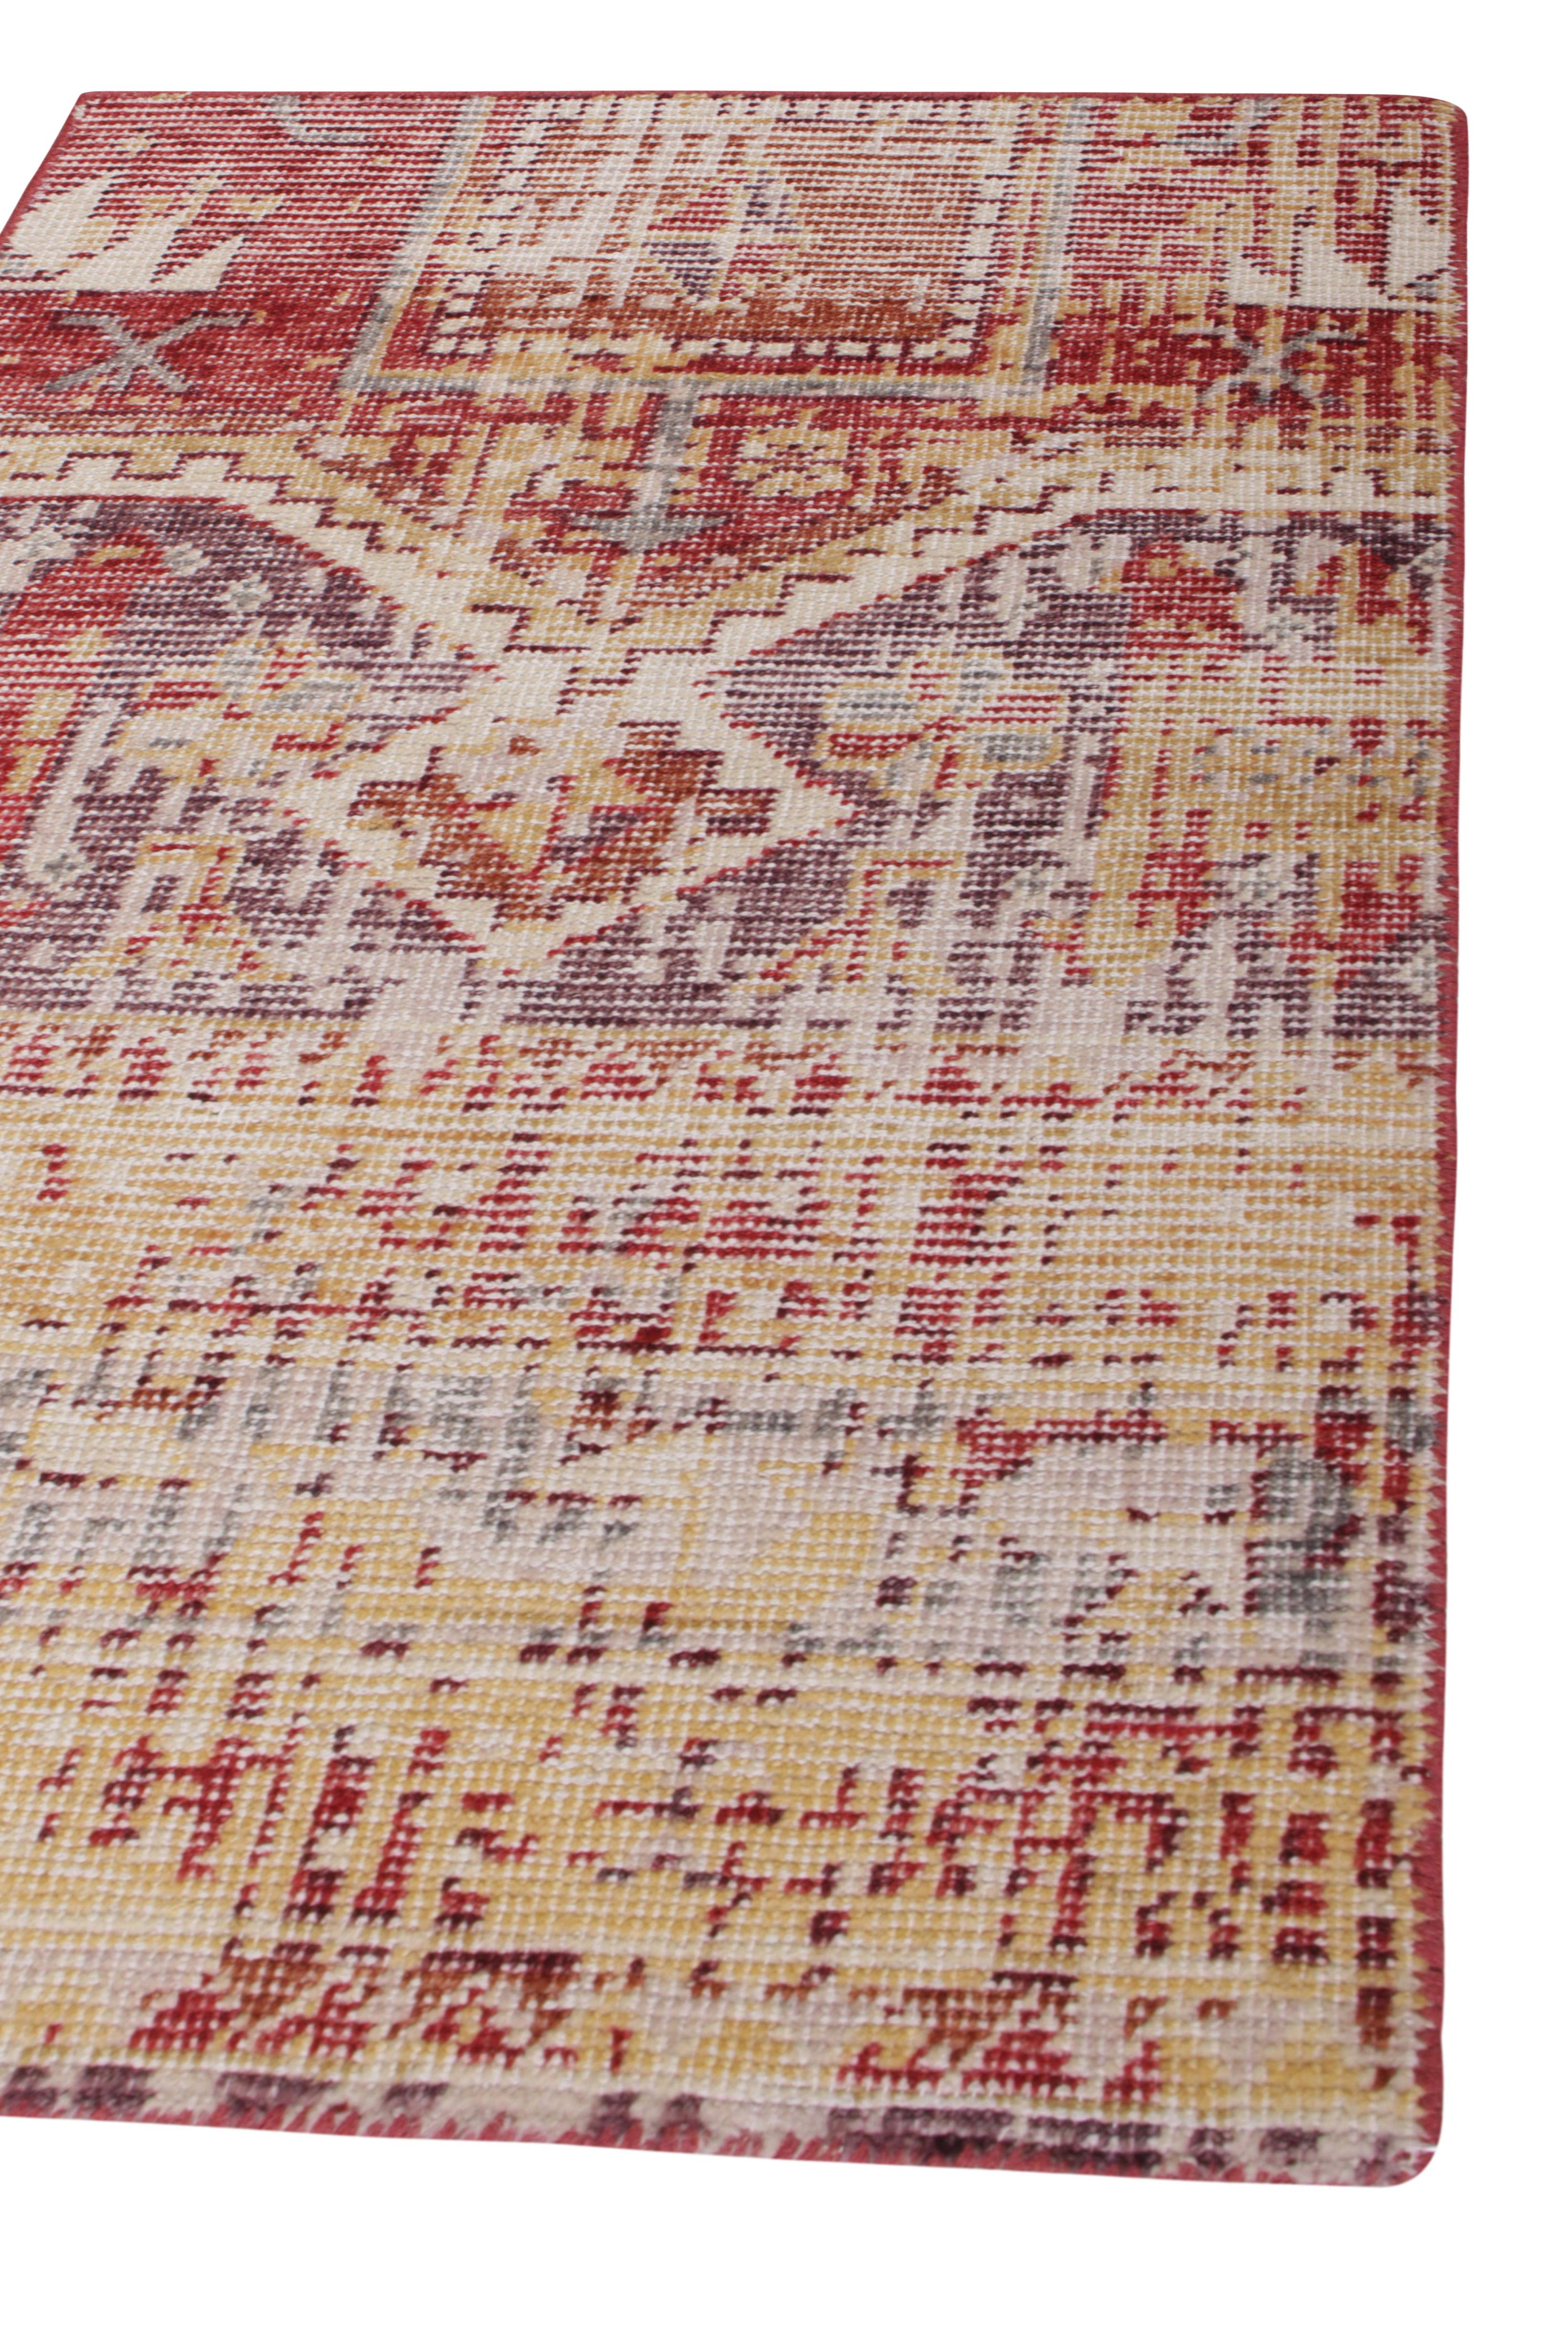 This 2x3 rug hails from the gift-size selections of Rug & Kilim’s Homage Collection, remarking a bold take on distressed style. This design recaptures classic rug styles with playful abstractions of tribal geometry in red, purple, and golden-beige.